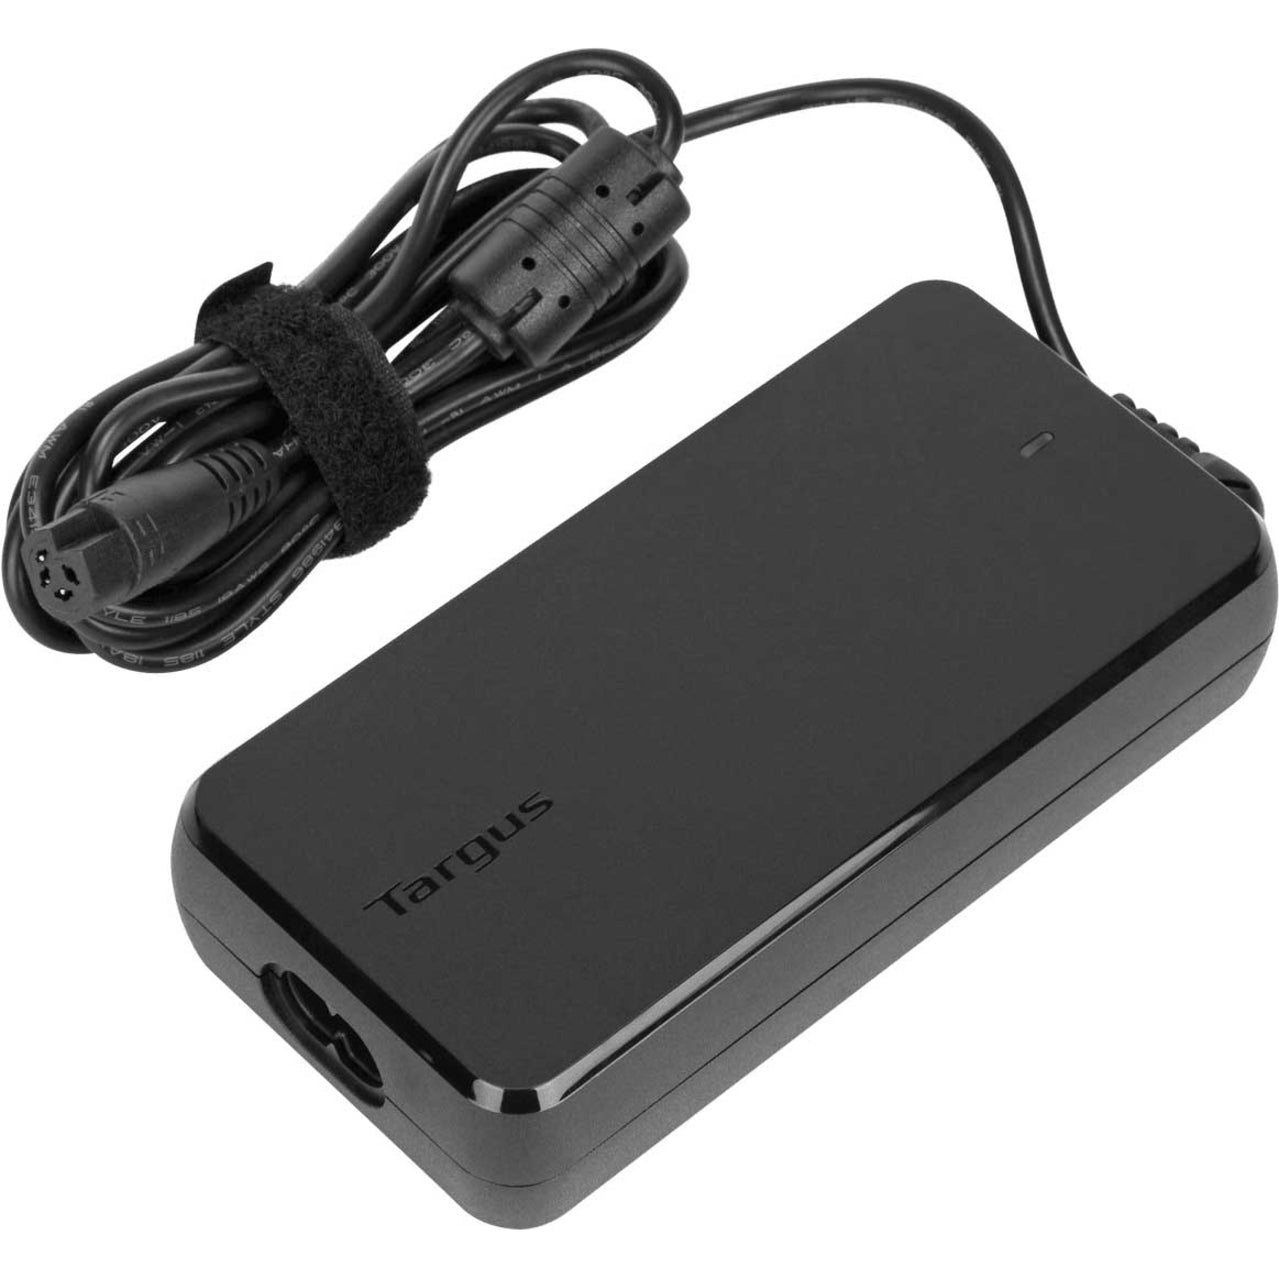 Targus APA32US Laptop Charger with USB Fast Charging Port, 90W Power Adapter